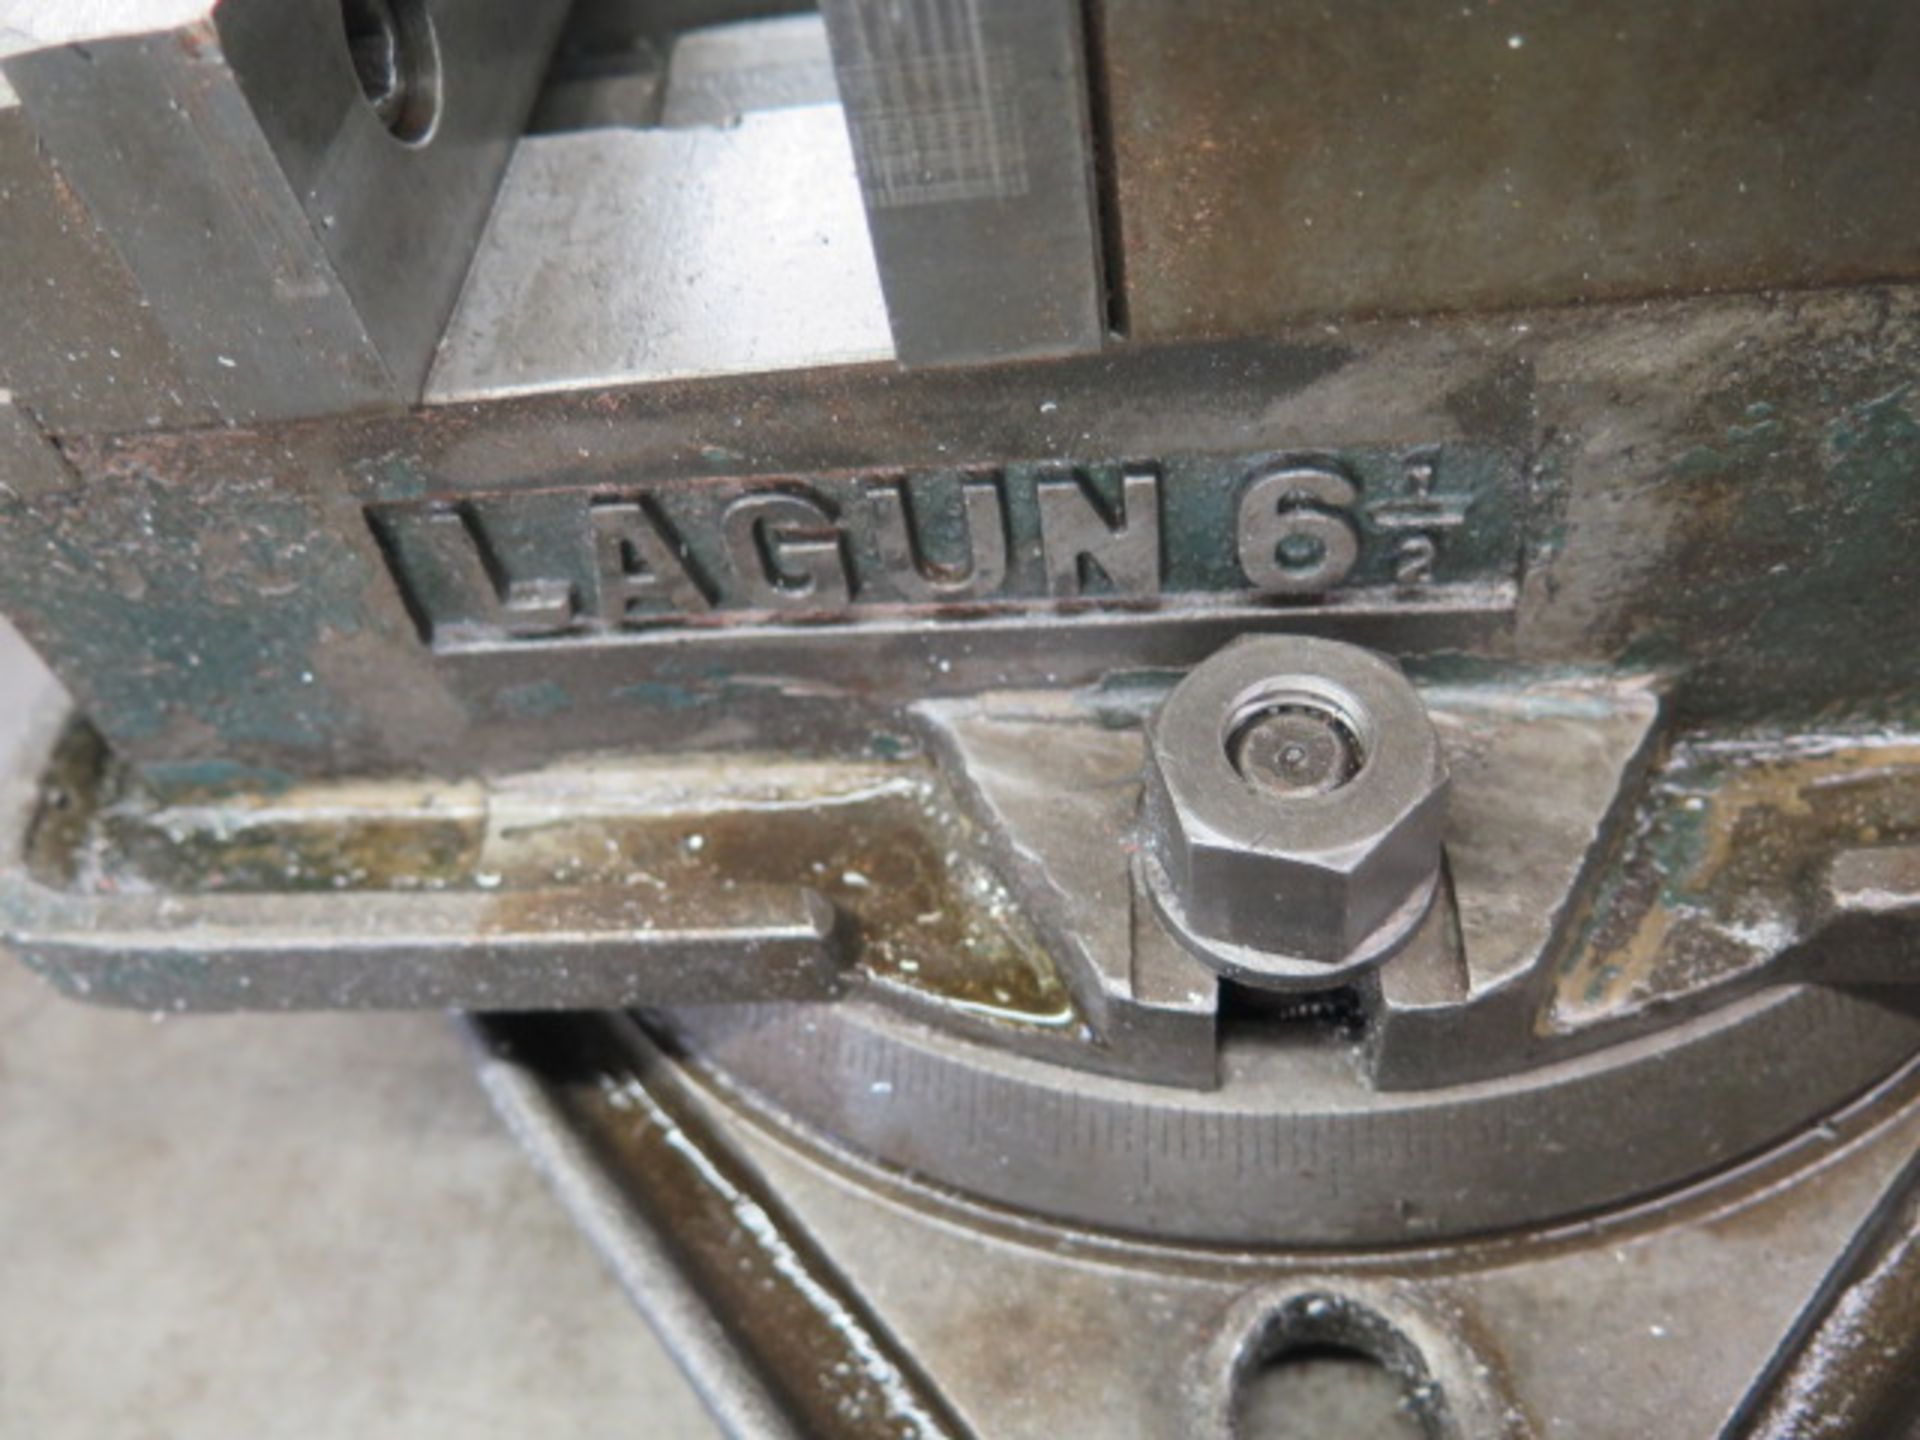 Lagun 6" Angle-Lock Vise w/ Swivel Base (SOLD AS-IS - N0 WARRANTY) - Image 3 of 3